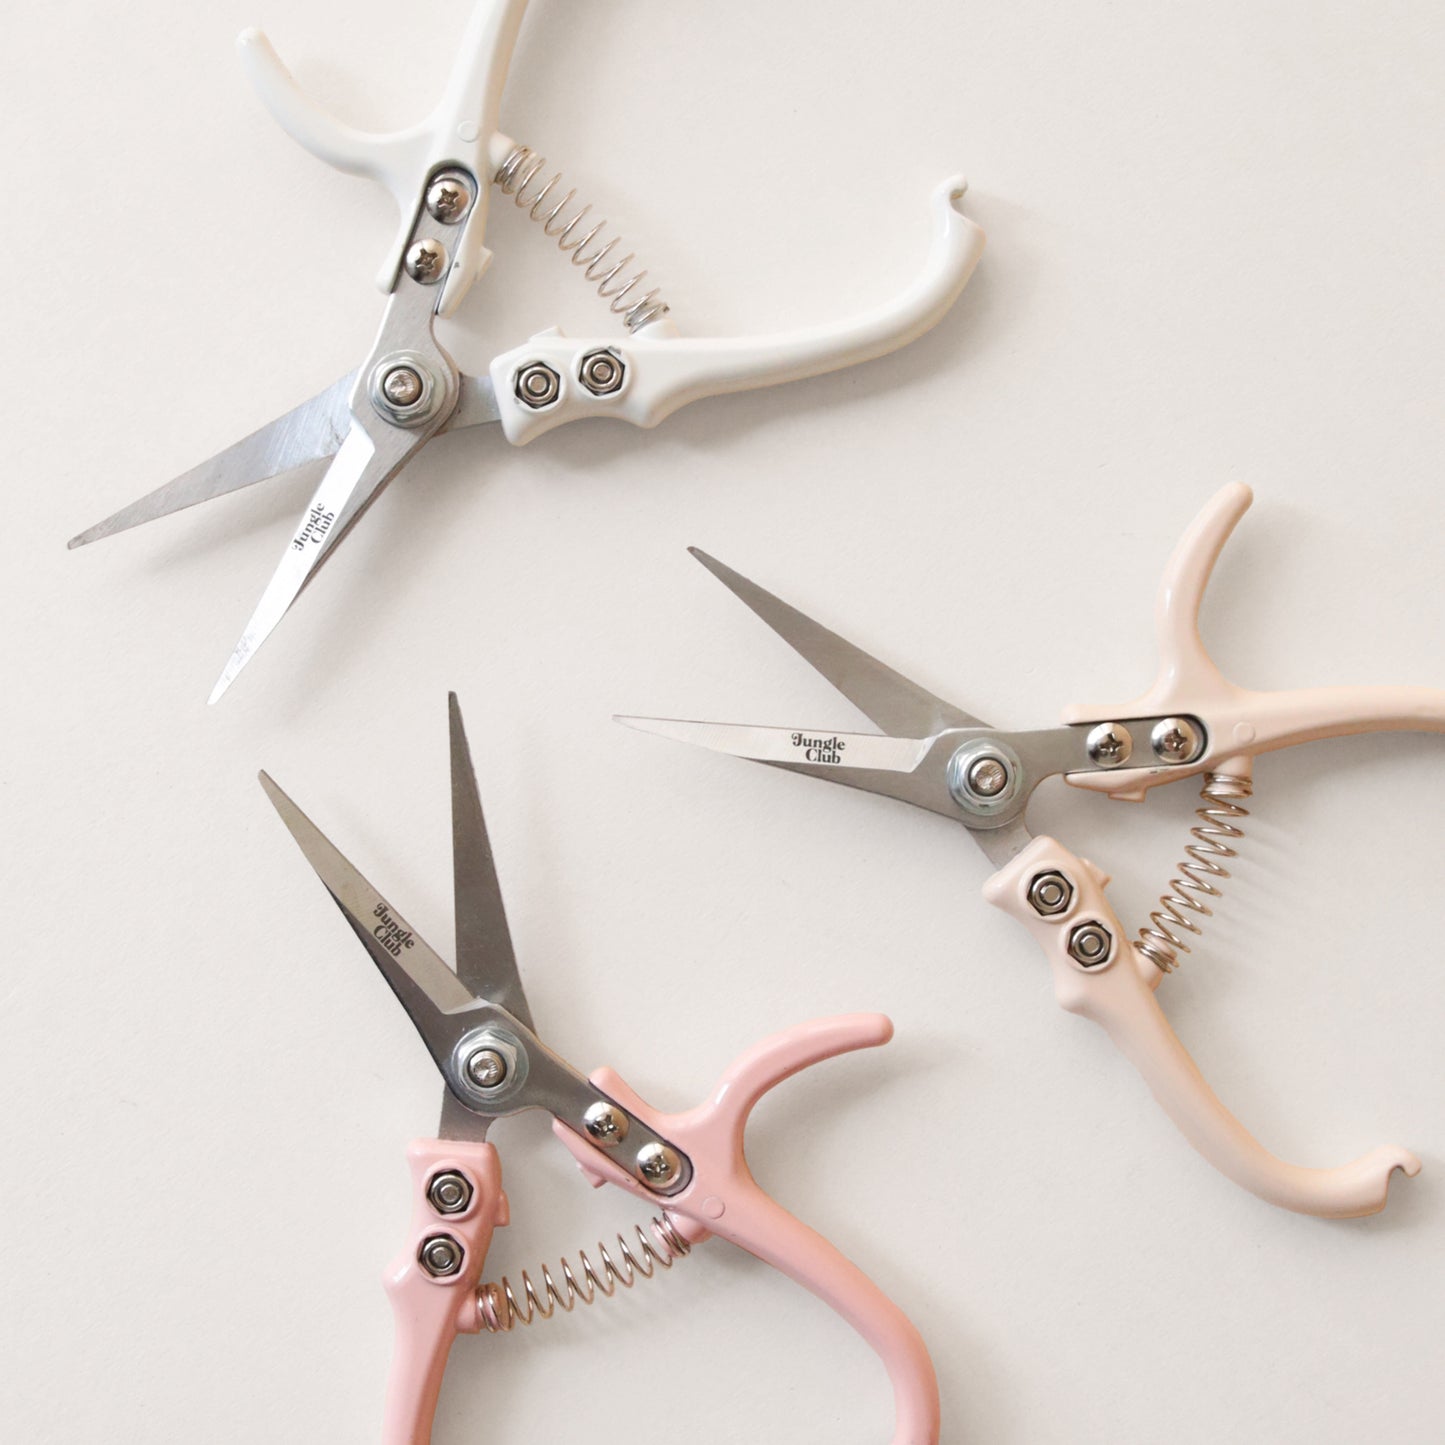 Pruning shears with a narrow tip, and light cream colored handle and a black clasp to connect when shears are not in use. There is small black text on the side of the shears that read, "Jungle Club" photographed here with the other colors available, pink and white.